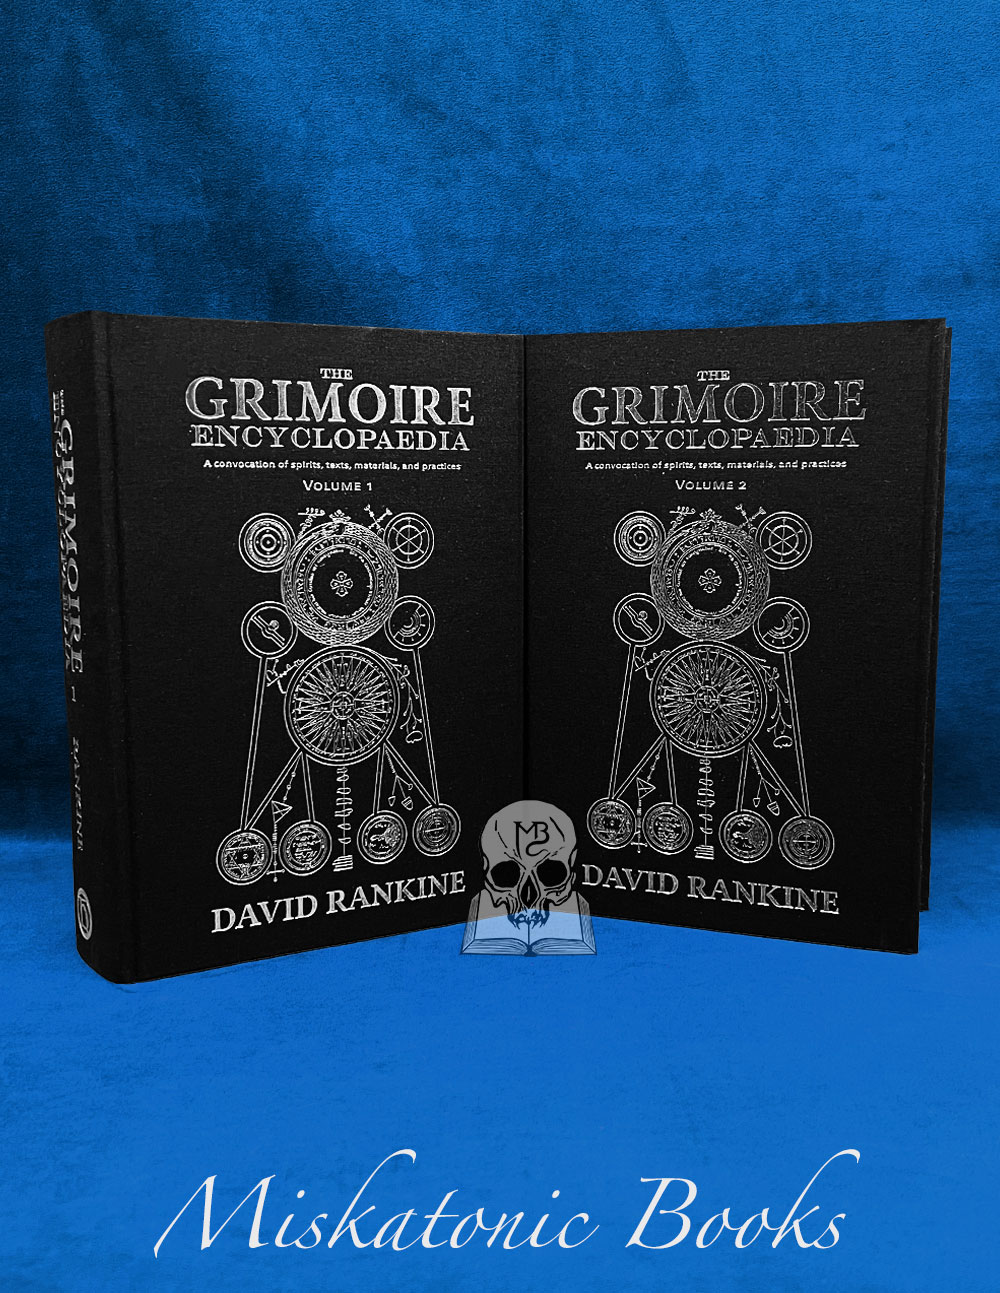 THE GRIMOIRE ENCYCLOPAEDIA: A convocation of spirits, texts, materials, and  practices by David Rankine, Two Volume Set - Limited Edition Hardcover